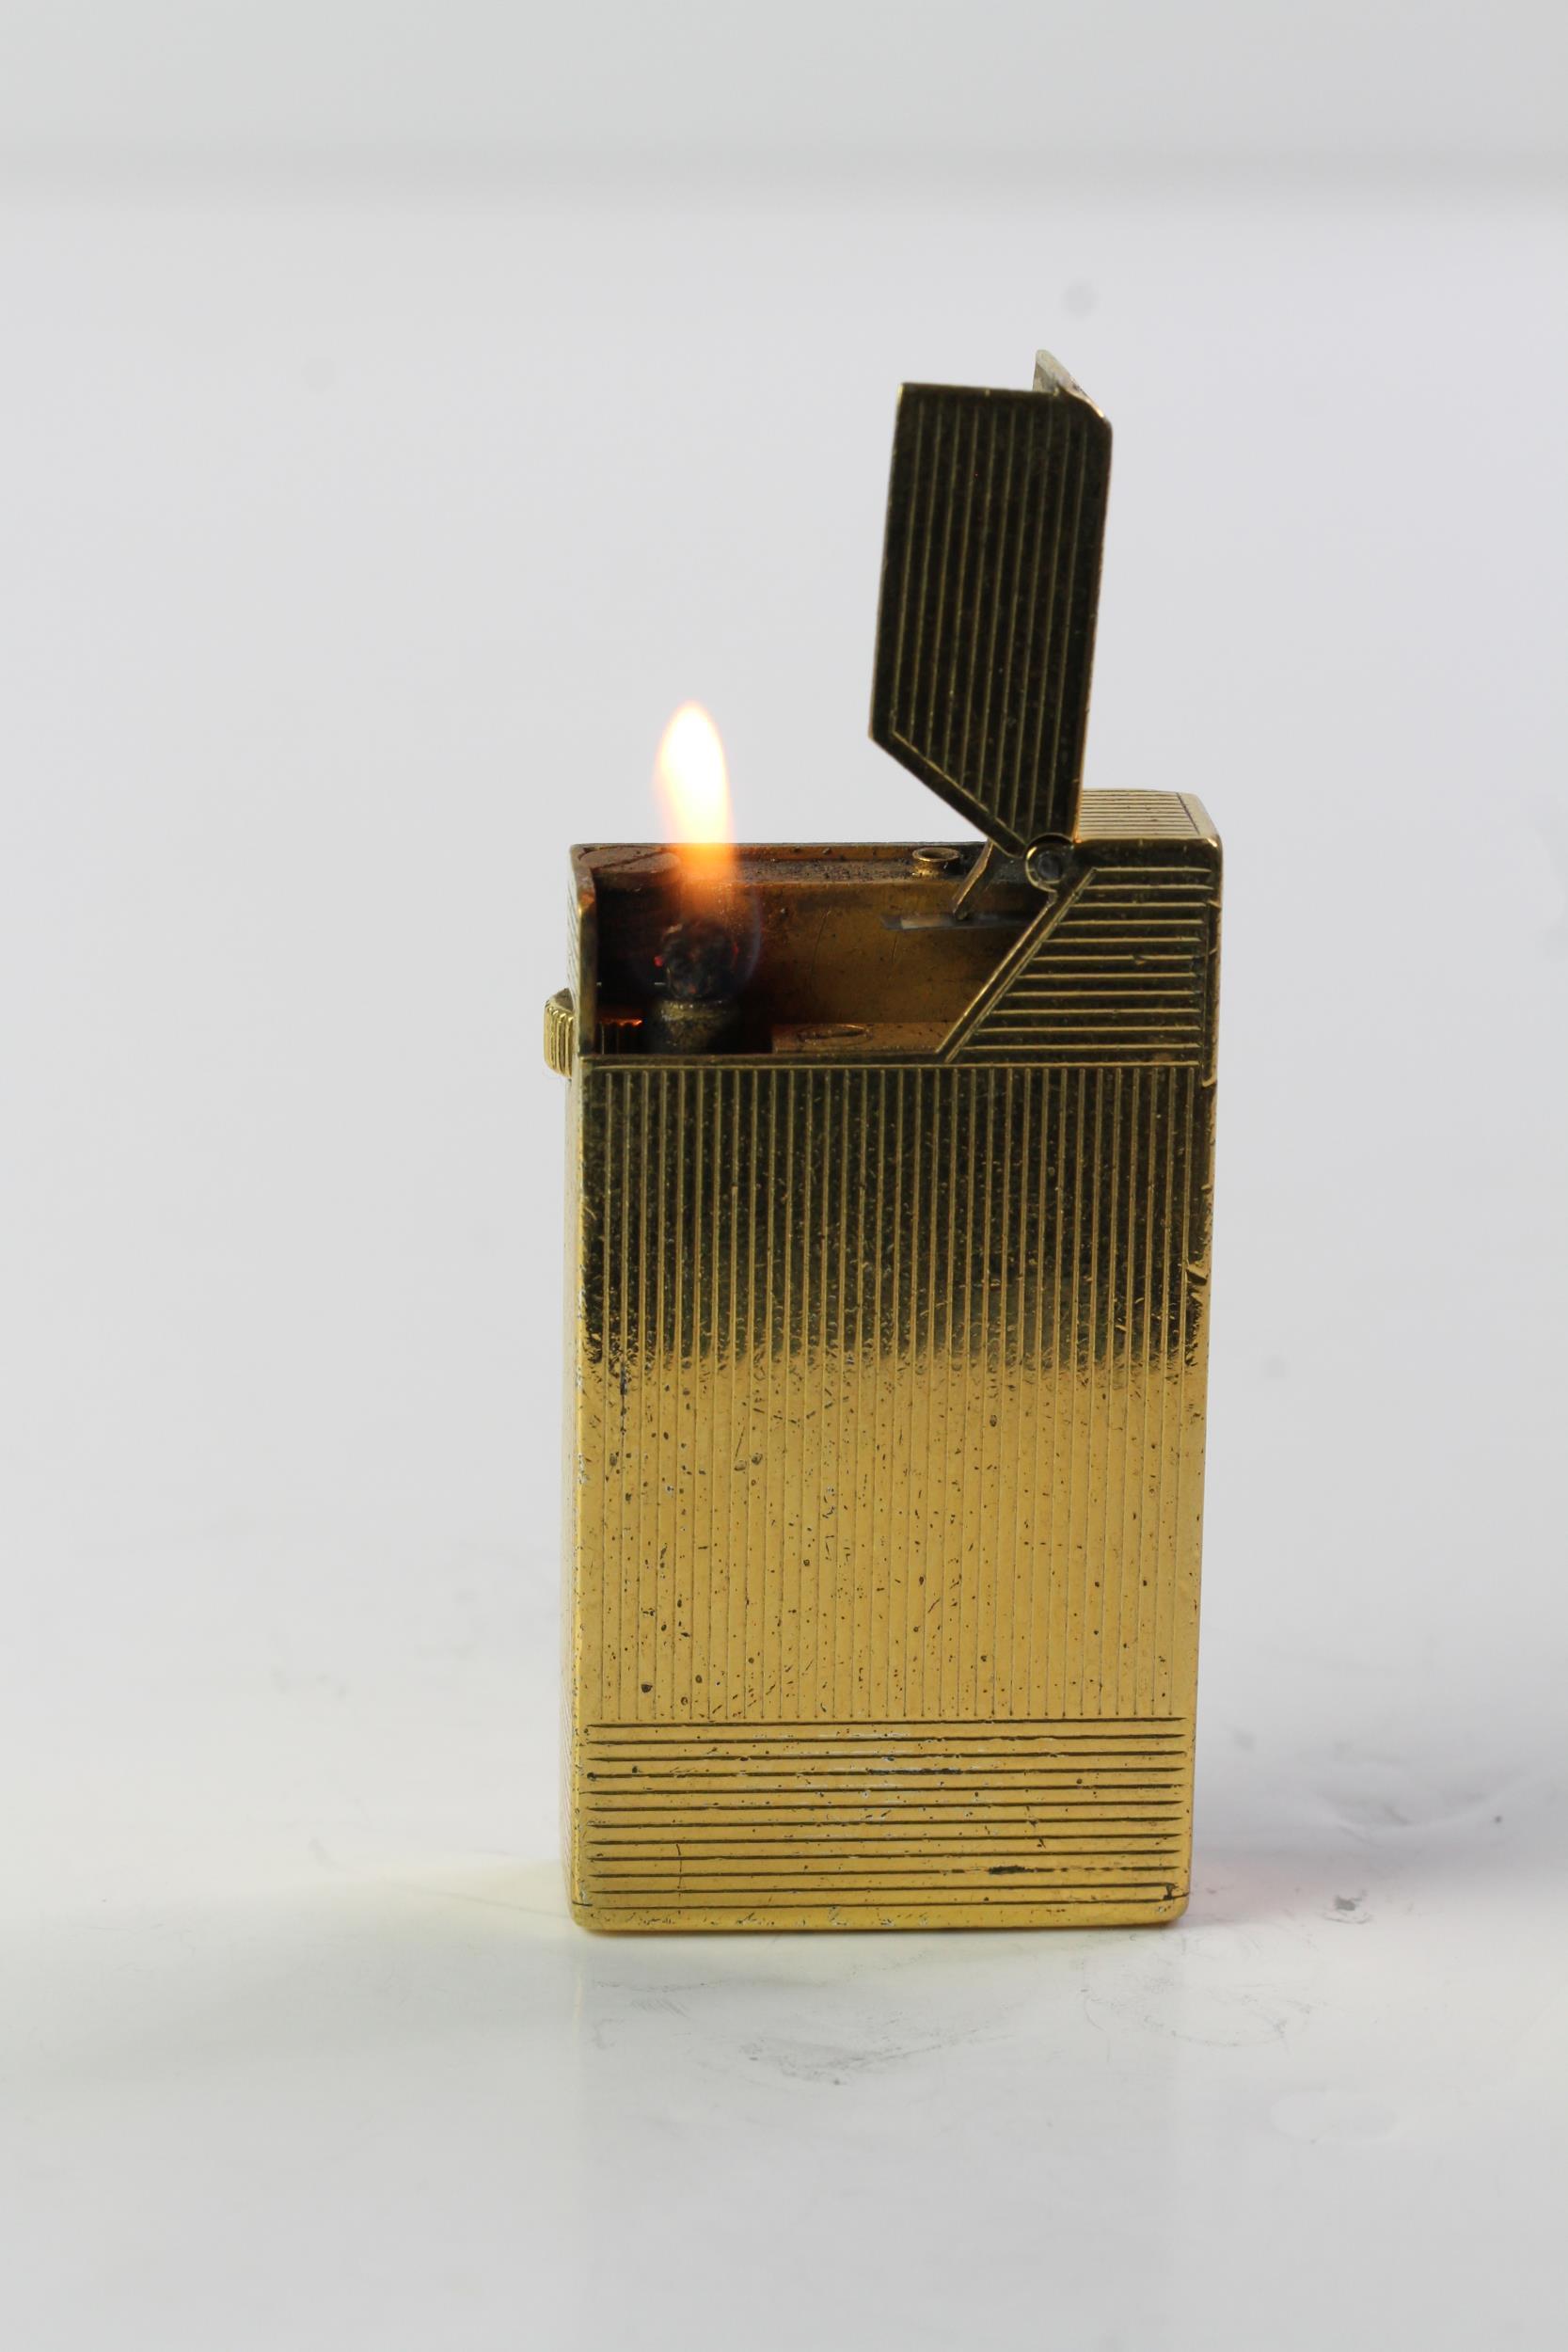 1950S DUNHILL BROAD BOY CIGARETTE LIGHTER, gold plated pin stripe case, signed with Patent number - Image 4 of 4